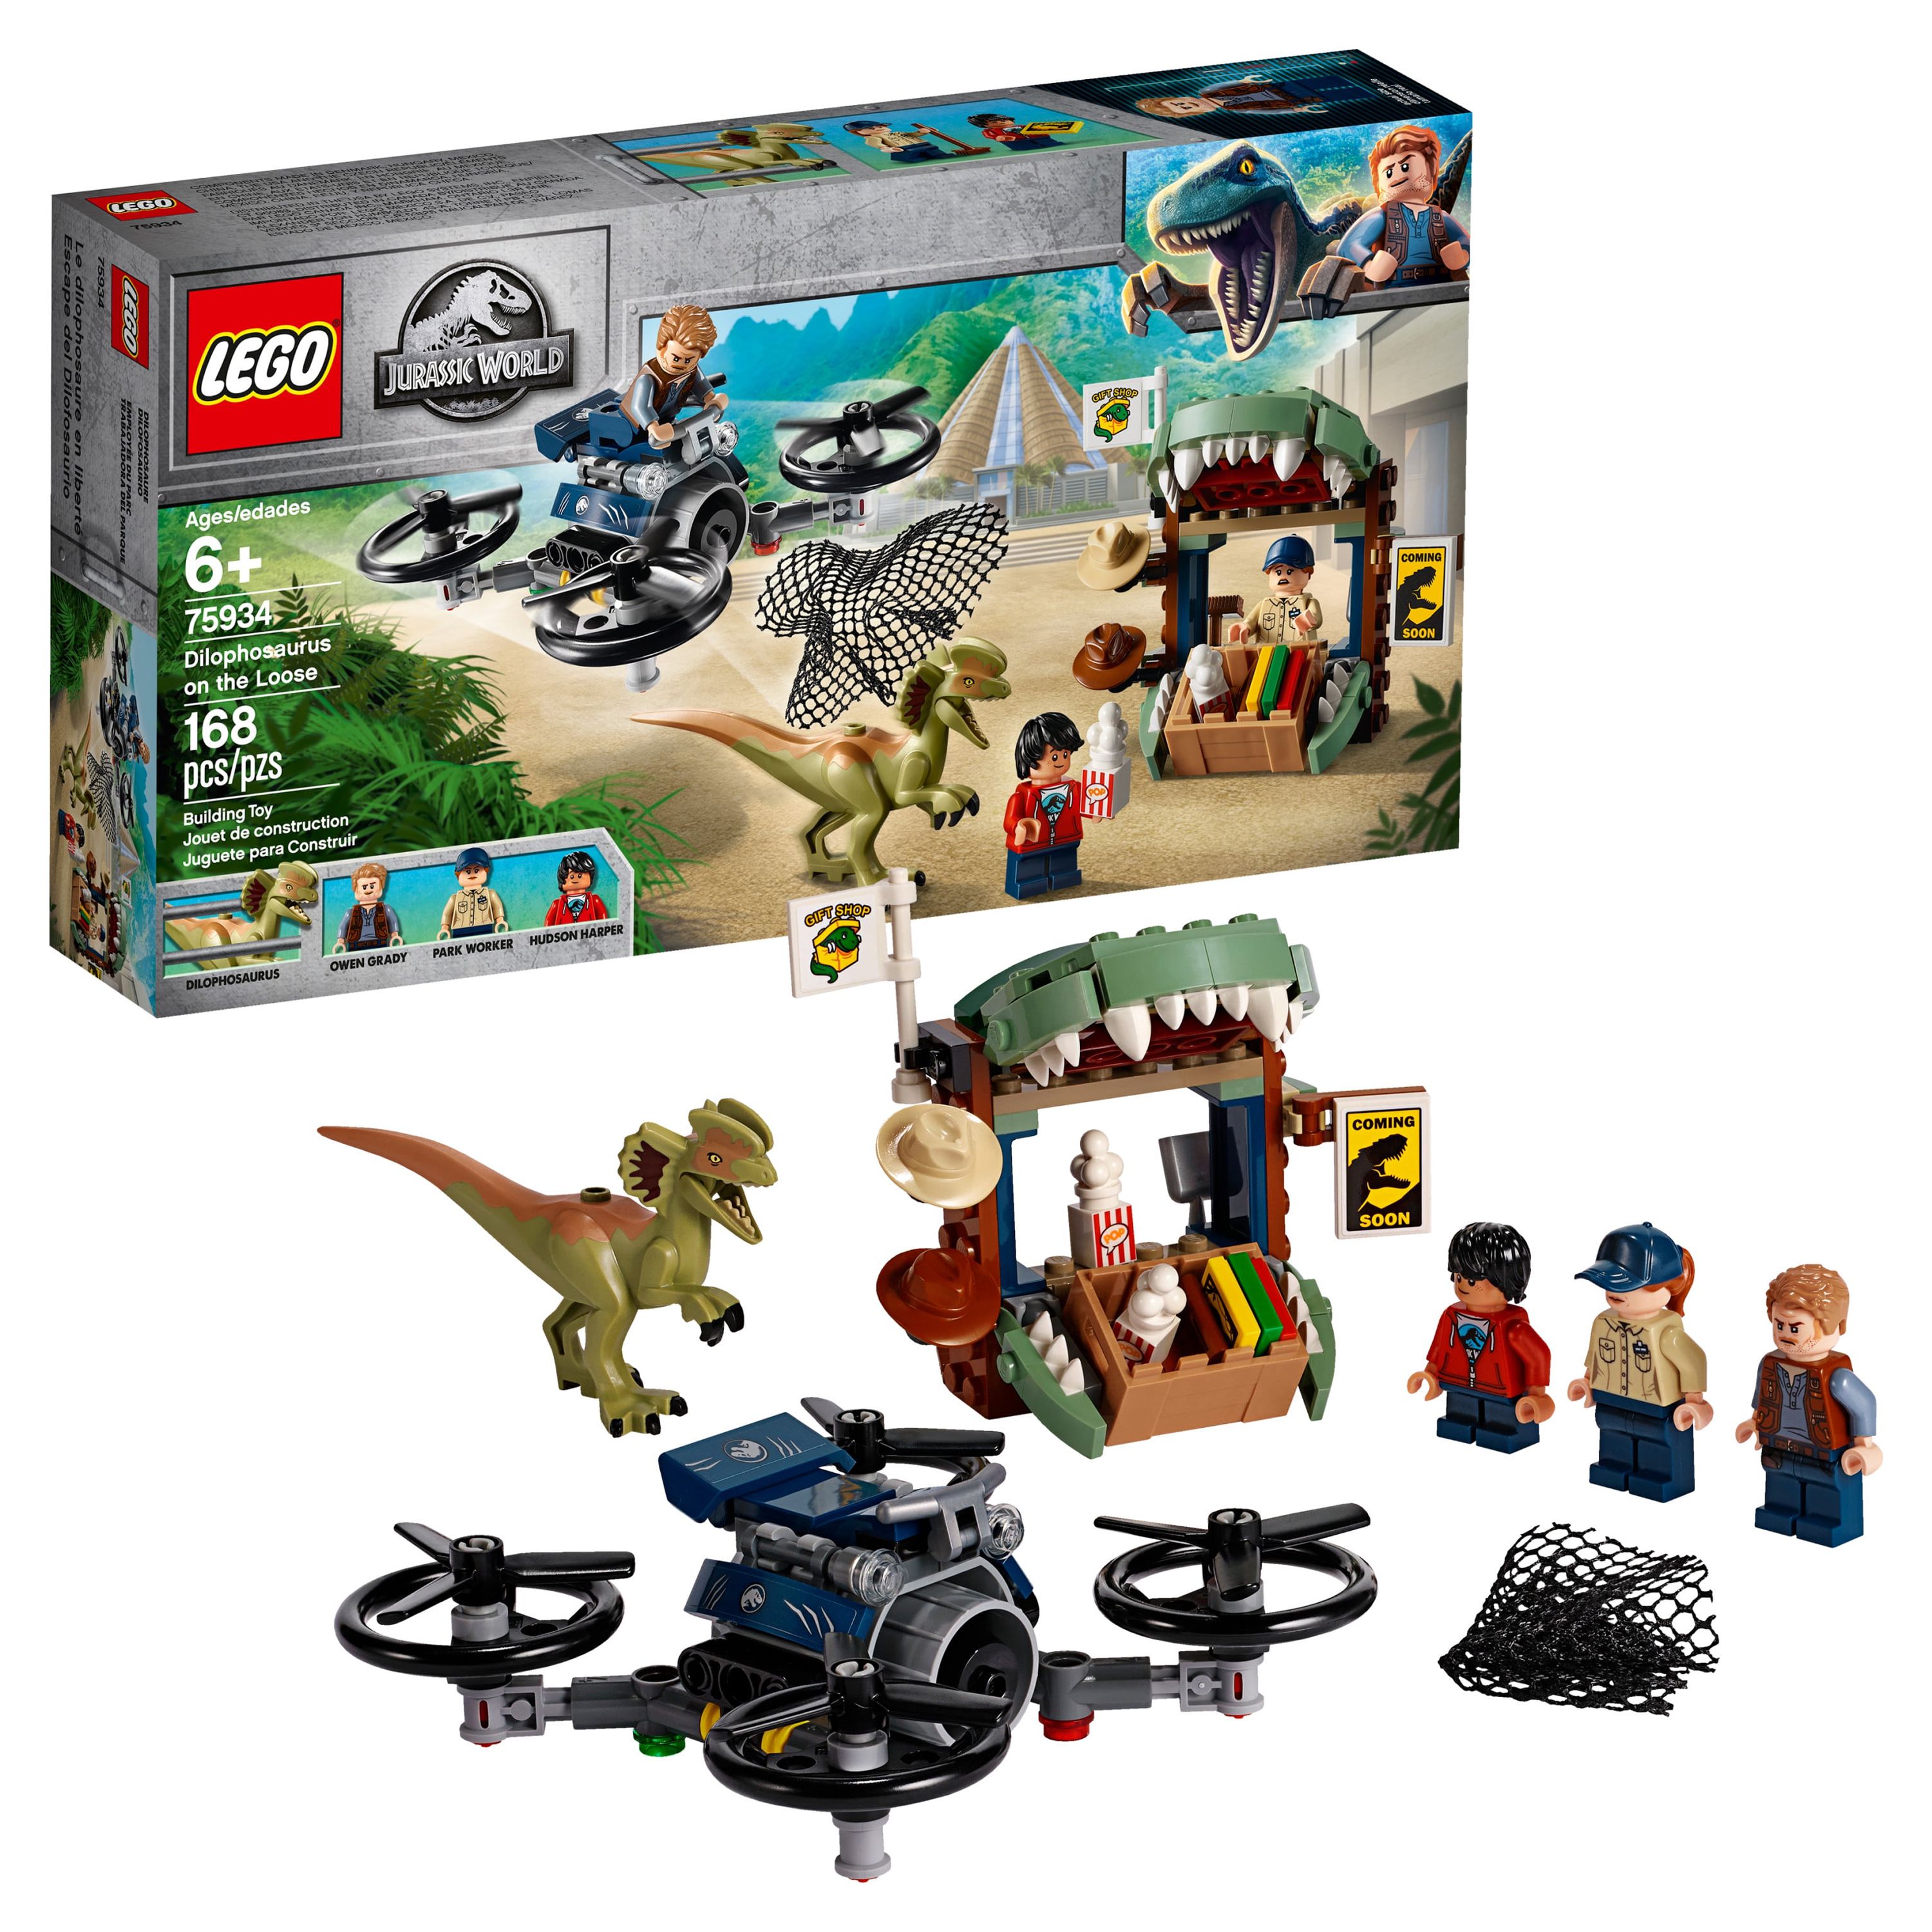 LEGO Jurassic World Dilophosaurus on the Loose 75934 Action Helicopter Drone Dinosaur Figure Building Toy (168 Pieces) - image 1 of 6